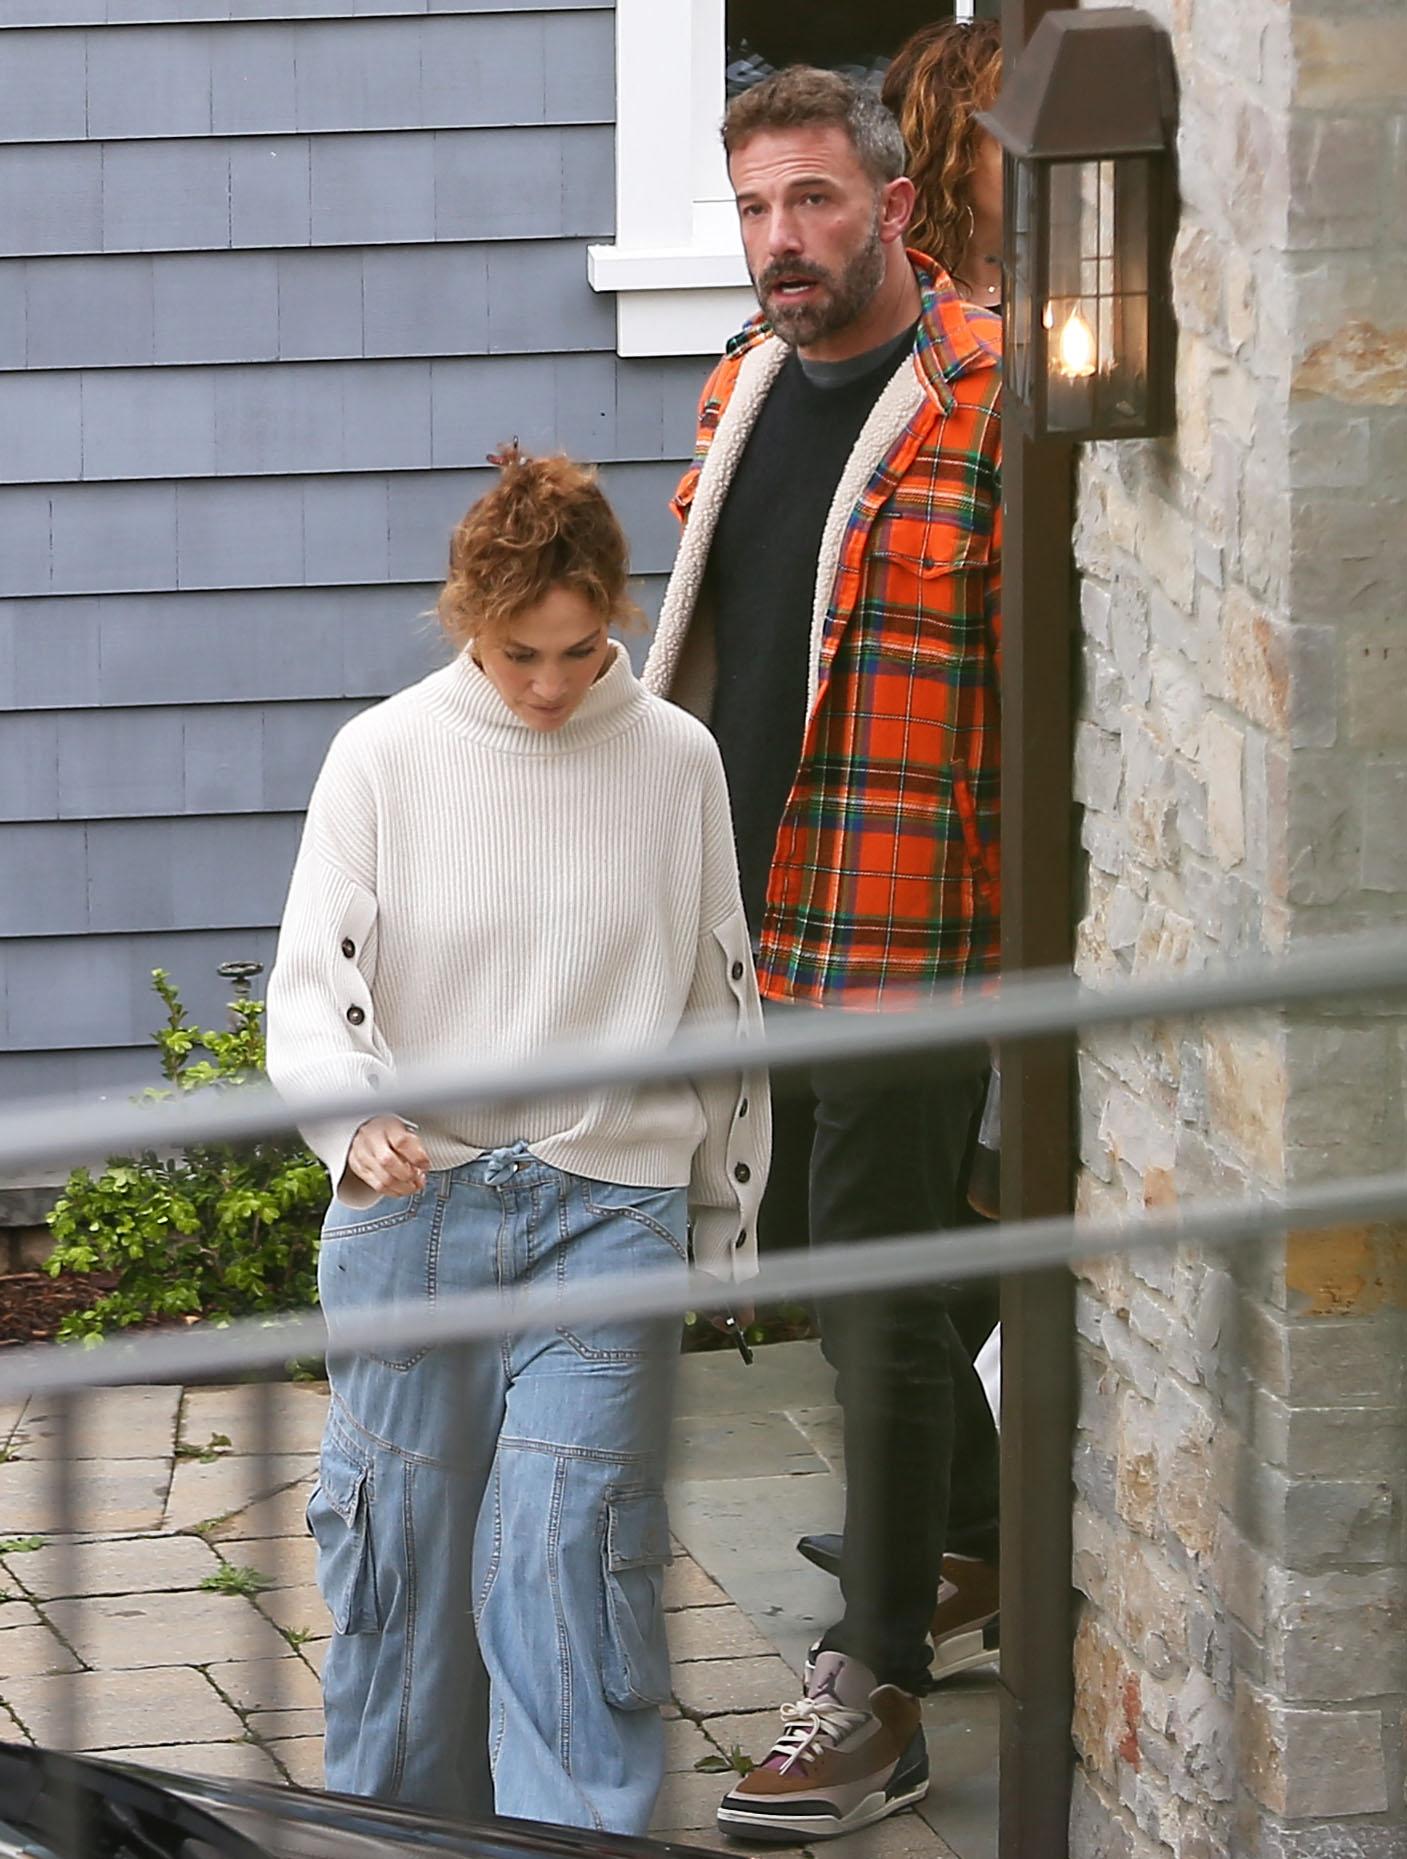 Ben Affleck and Jennifer Lopez view the 65 000 000 house for a third time